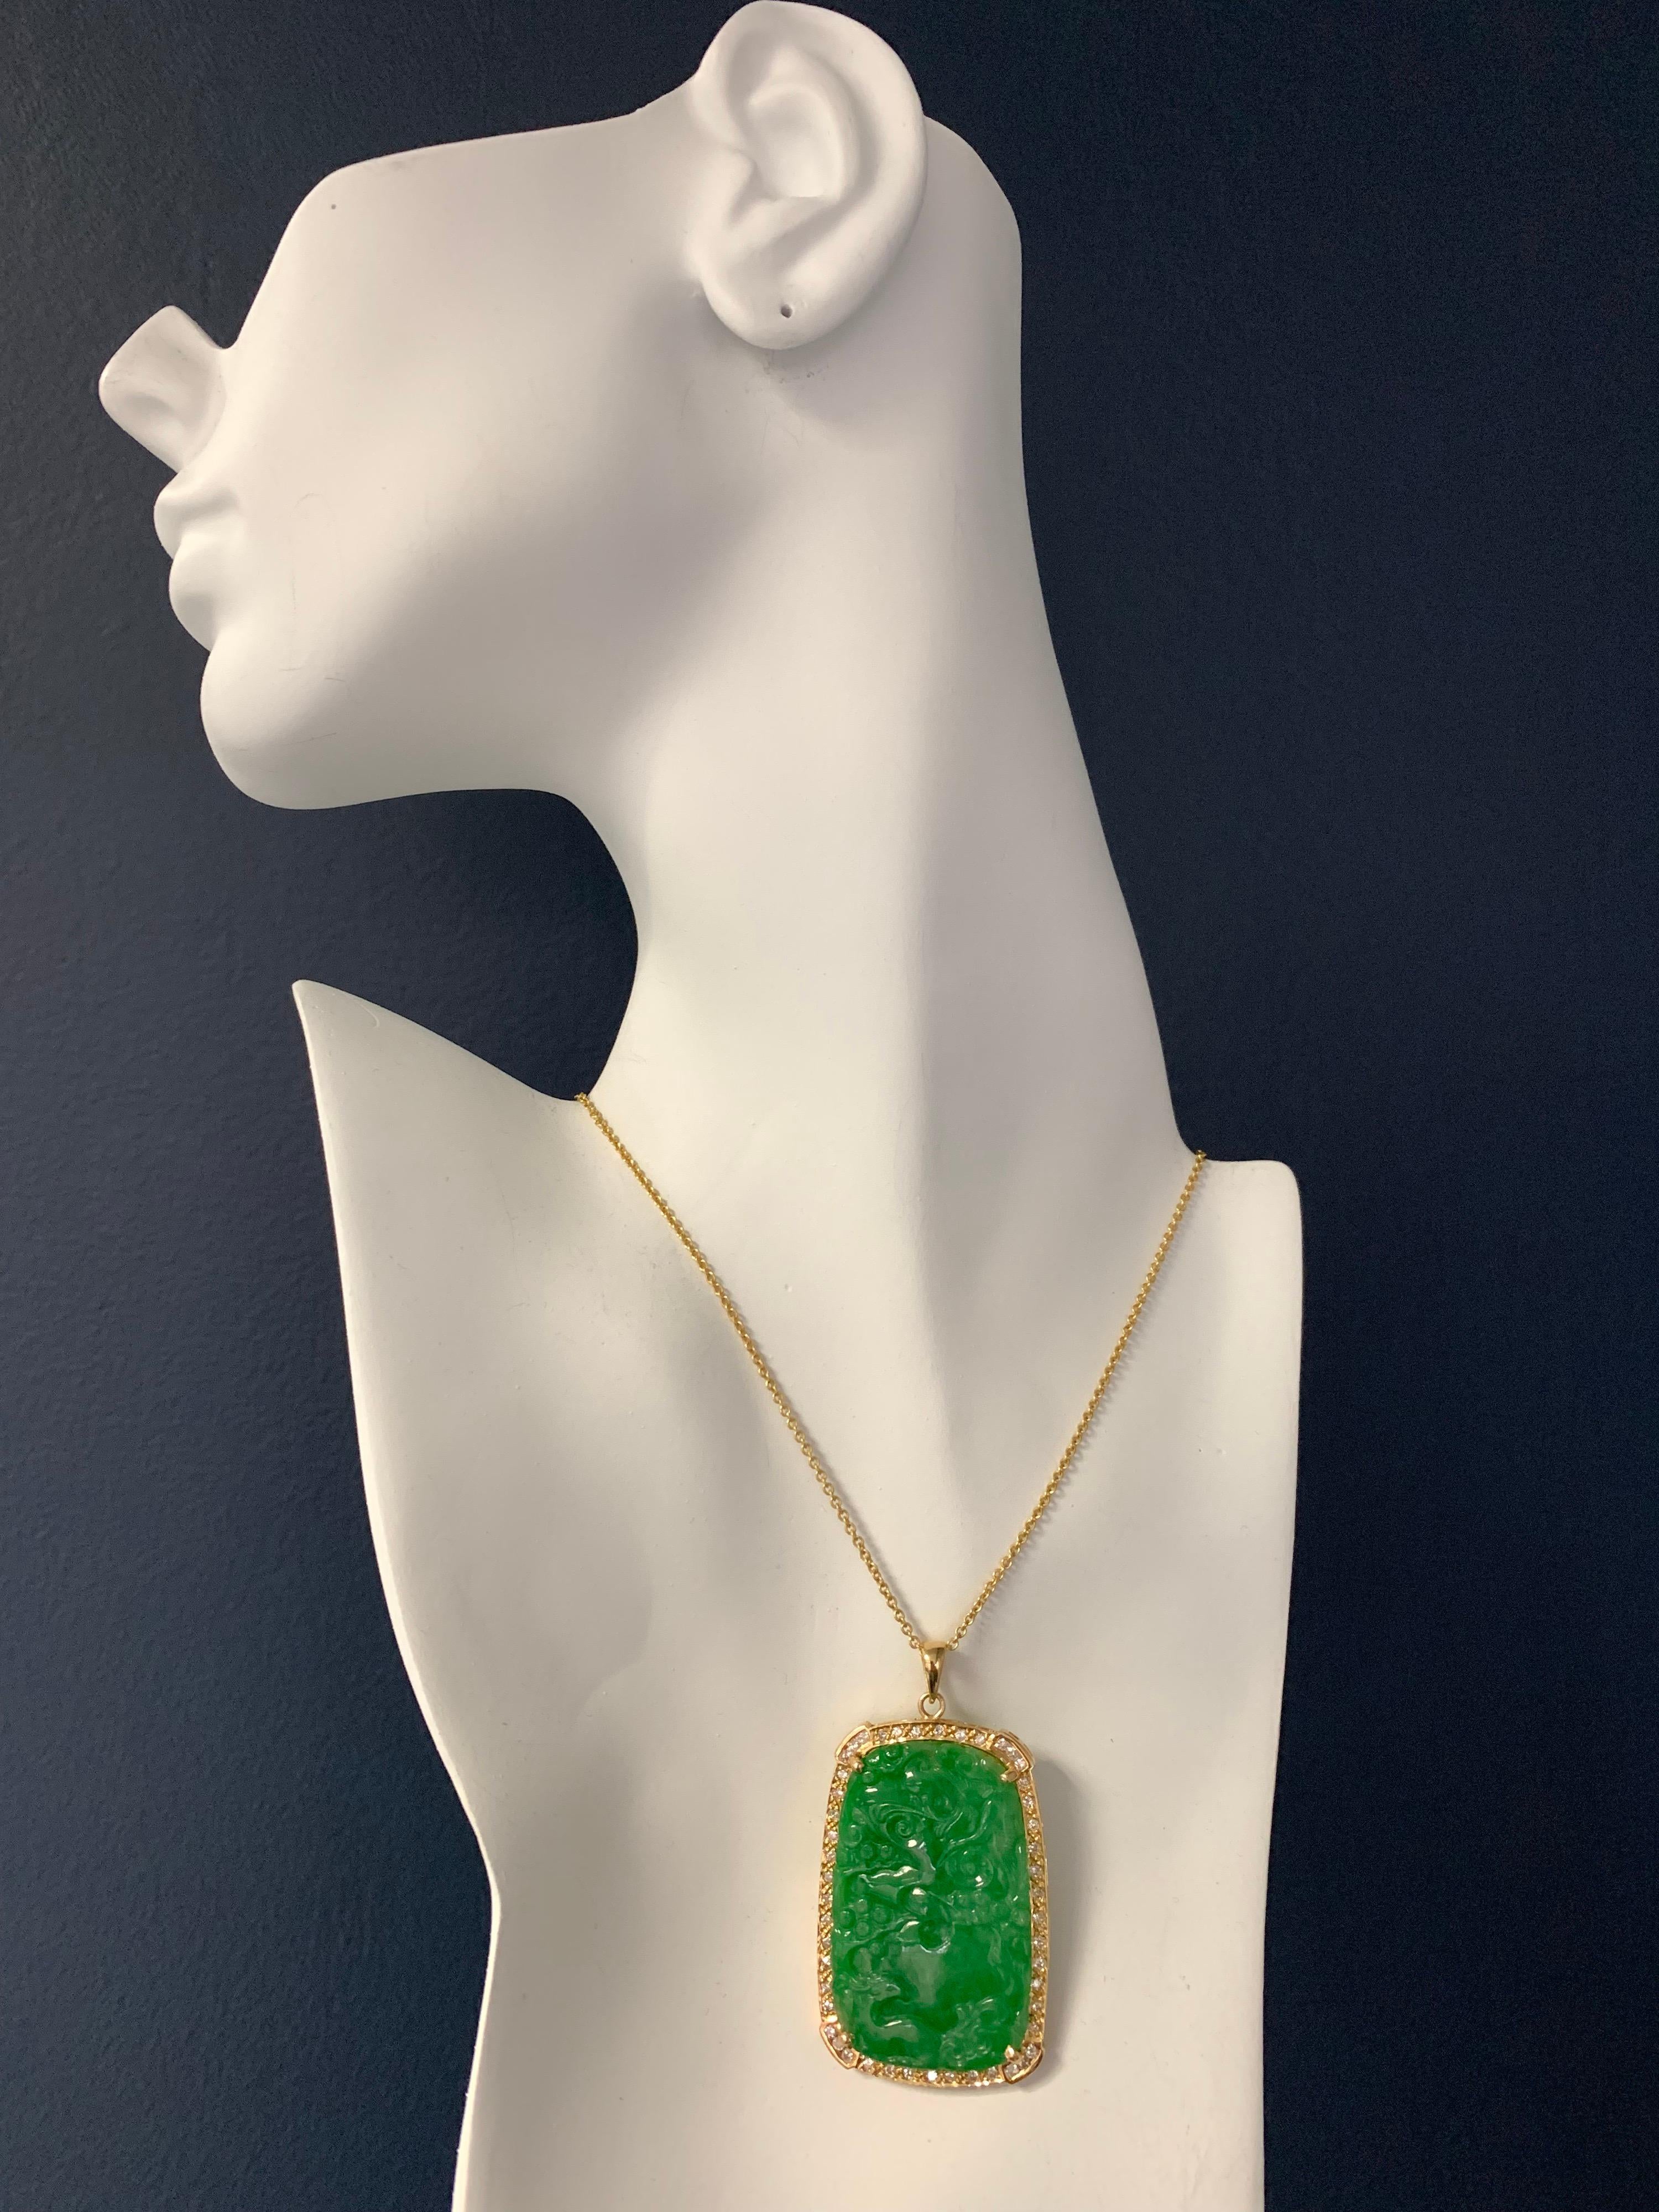 Rare GIA Certified Estate Natural Diamond and Jade 18k Yellow Gold Pendant measuring 43.01x28.25x4.44mm.

The Pendant is set with a Natural Translucent Jadeite Jade Green Carving with Natural Color, no indications of impregnation. The total weight